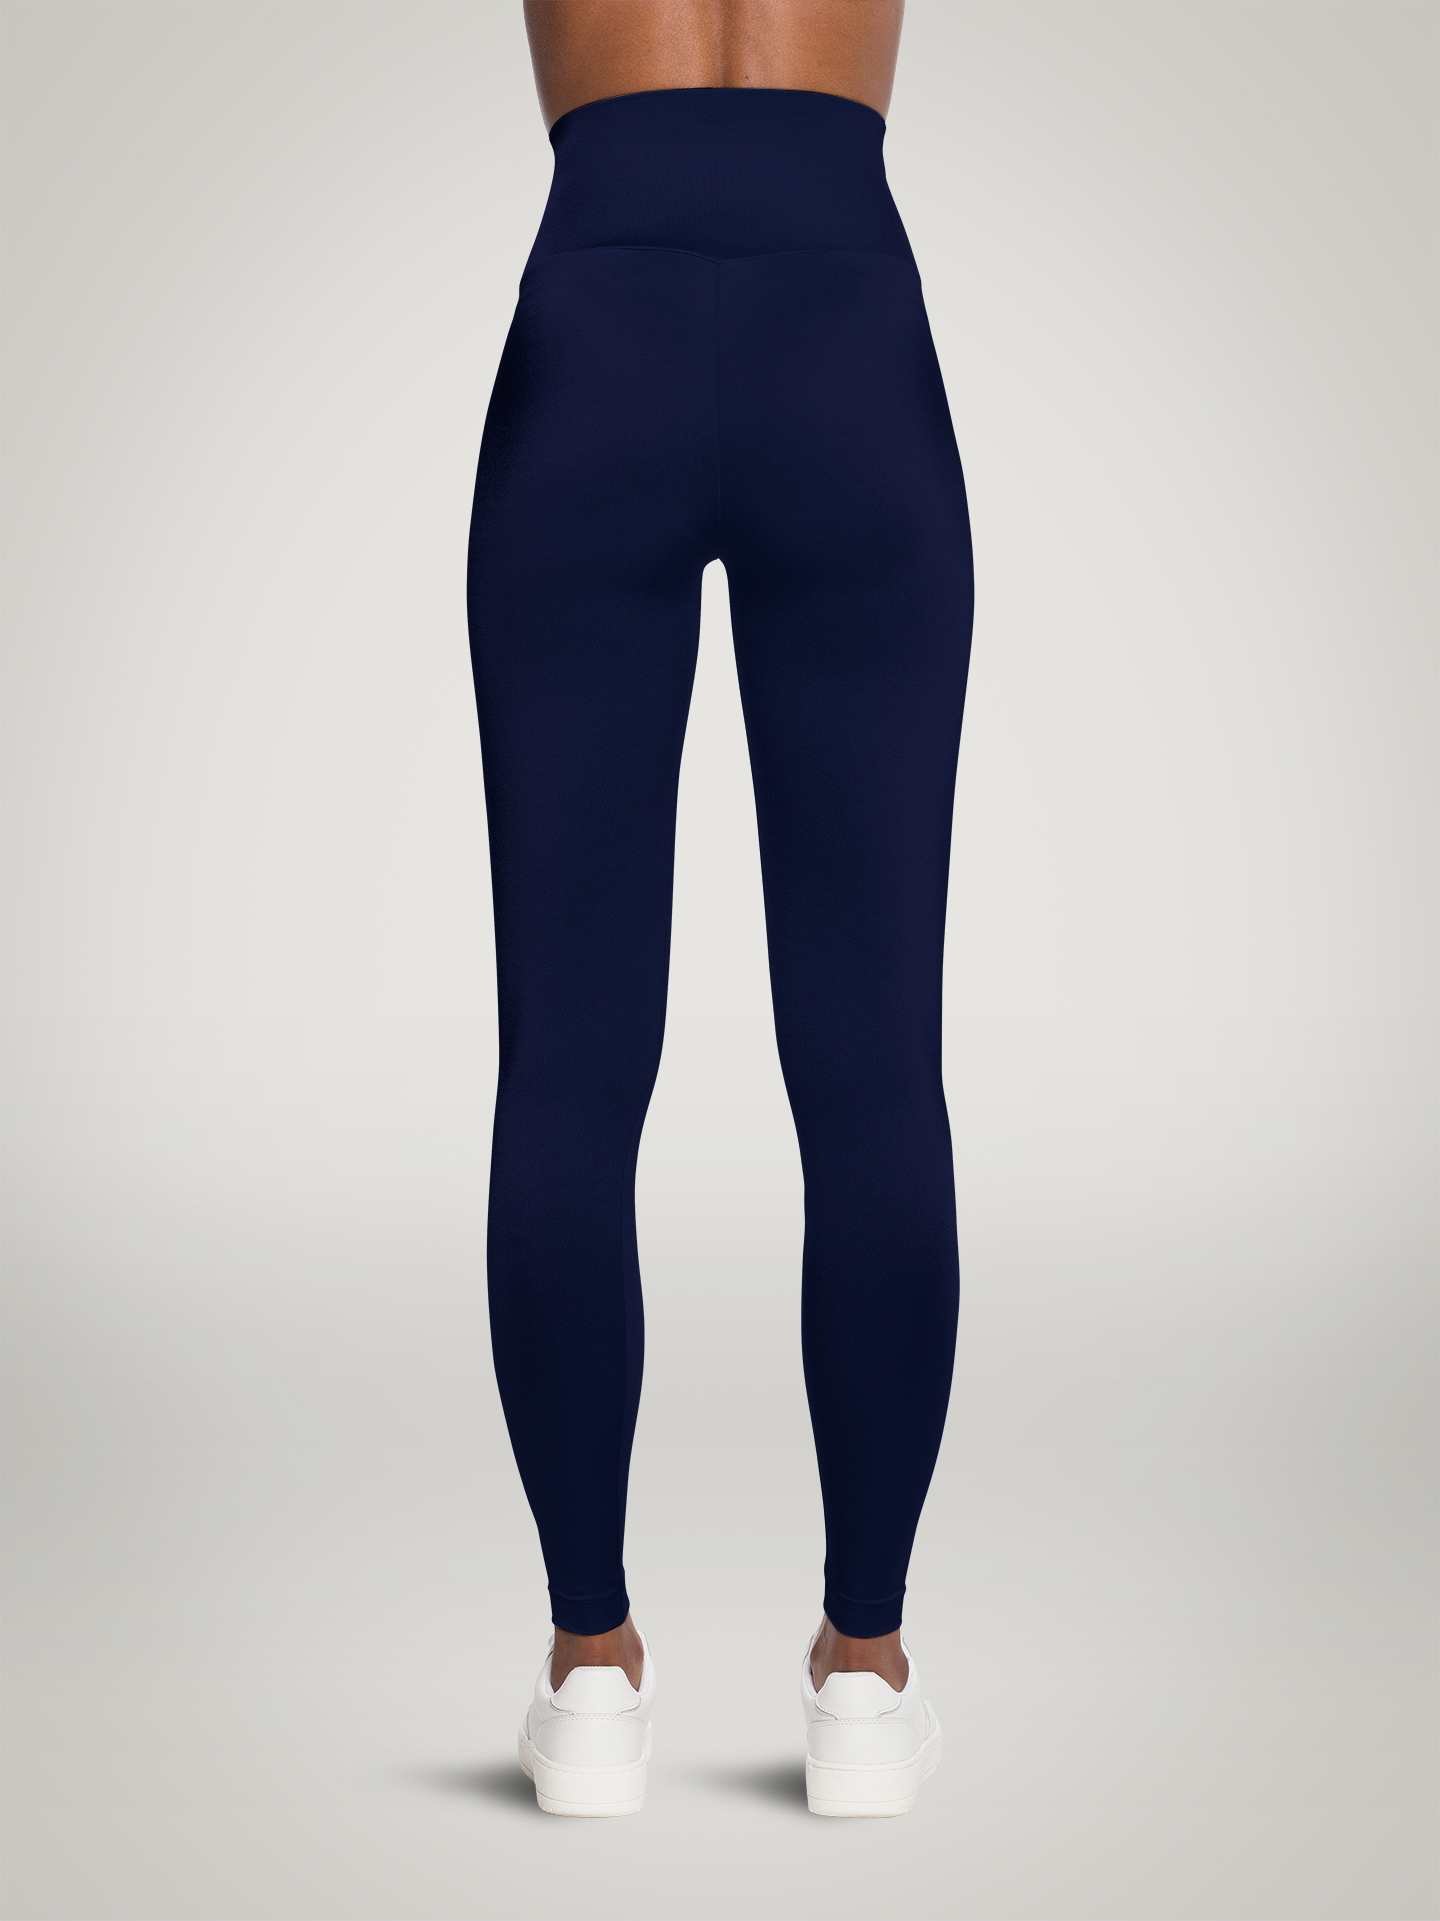 WOLFORD 19349 The Workout Leggings